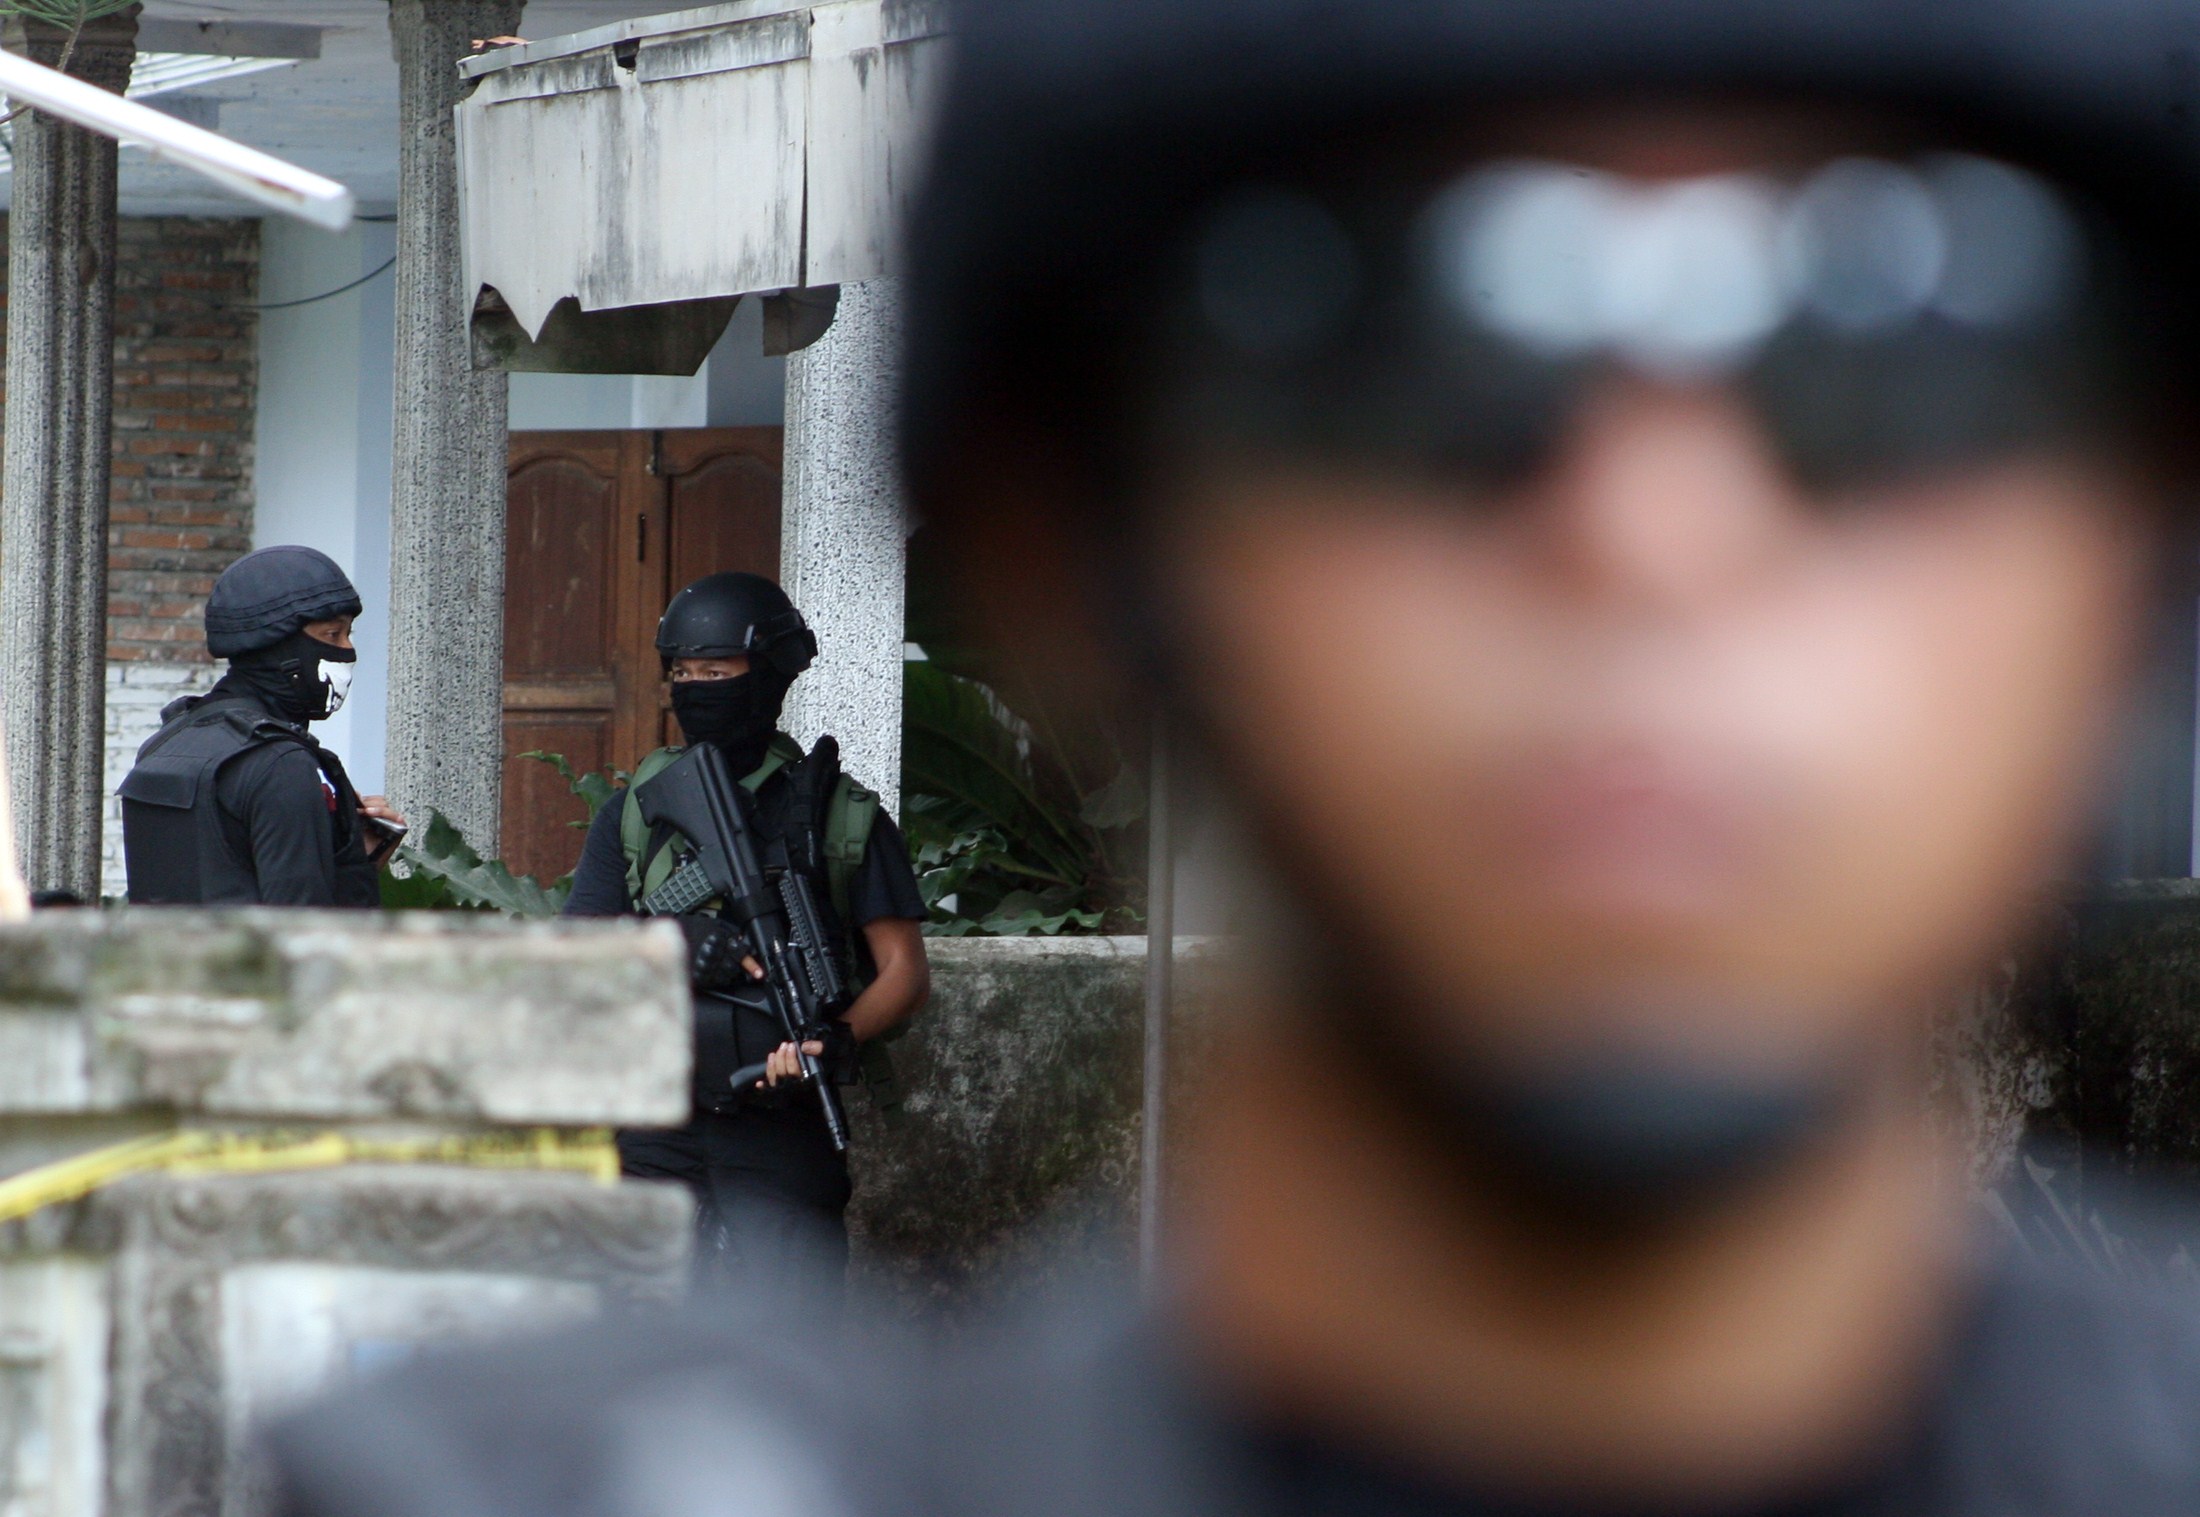 Indonesian antiterrorism police squad Densus 88 search houses in the Indonesian town of Kediri, in eastern Java, on Jan. 16, 2015 (Andika—AFP/Getty Images)